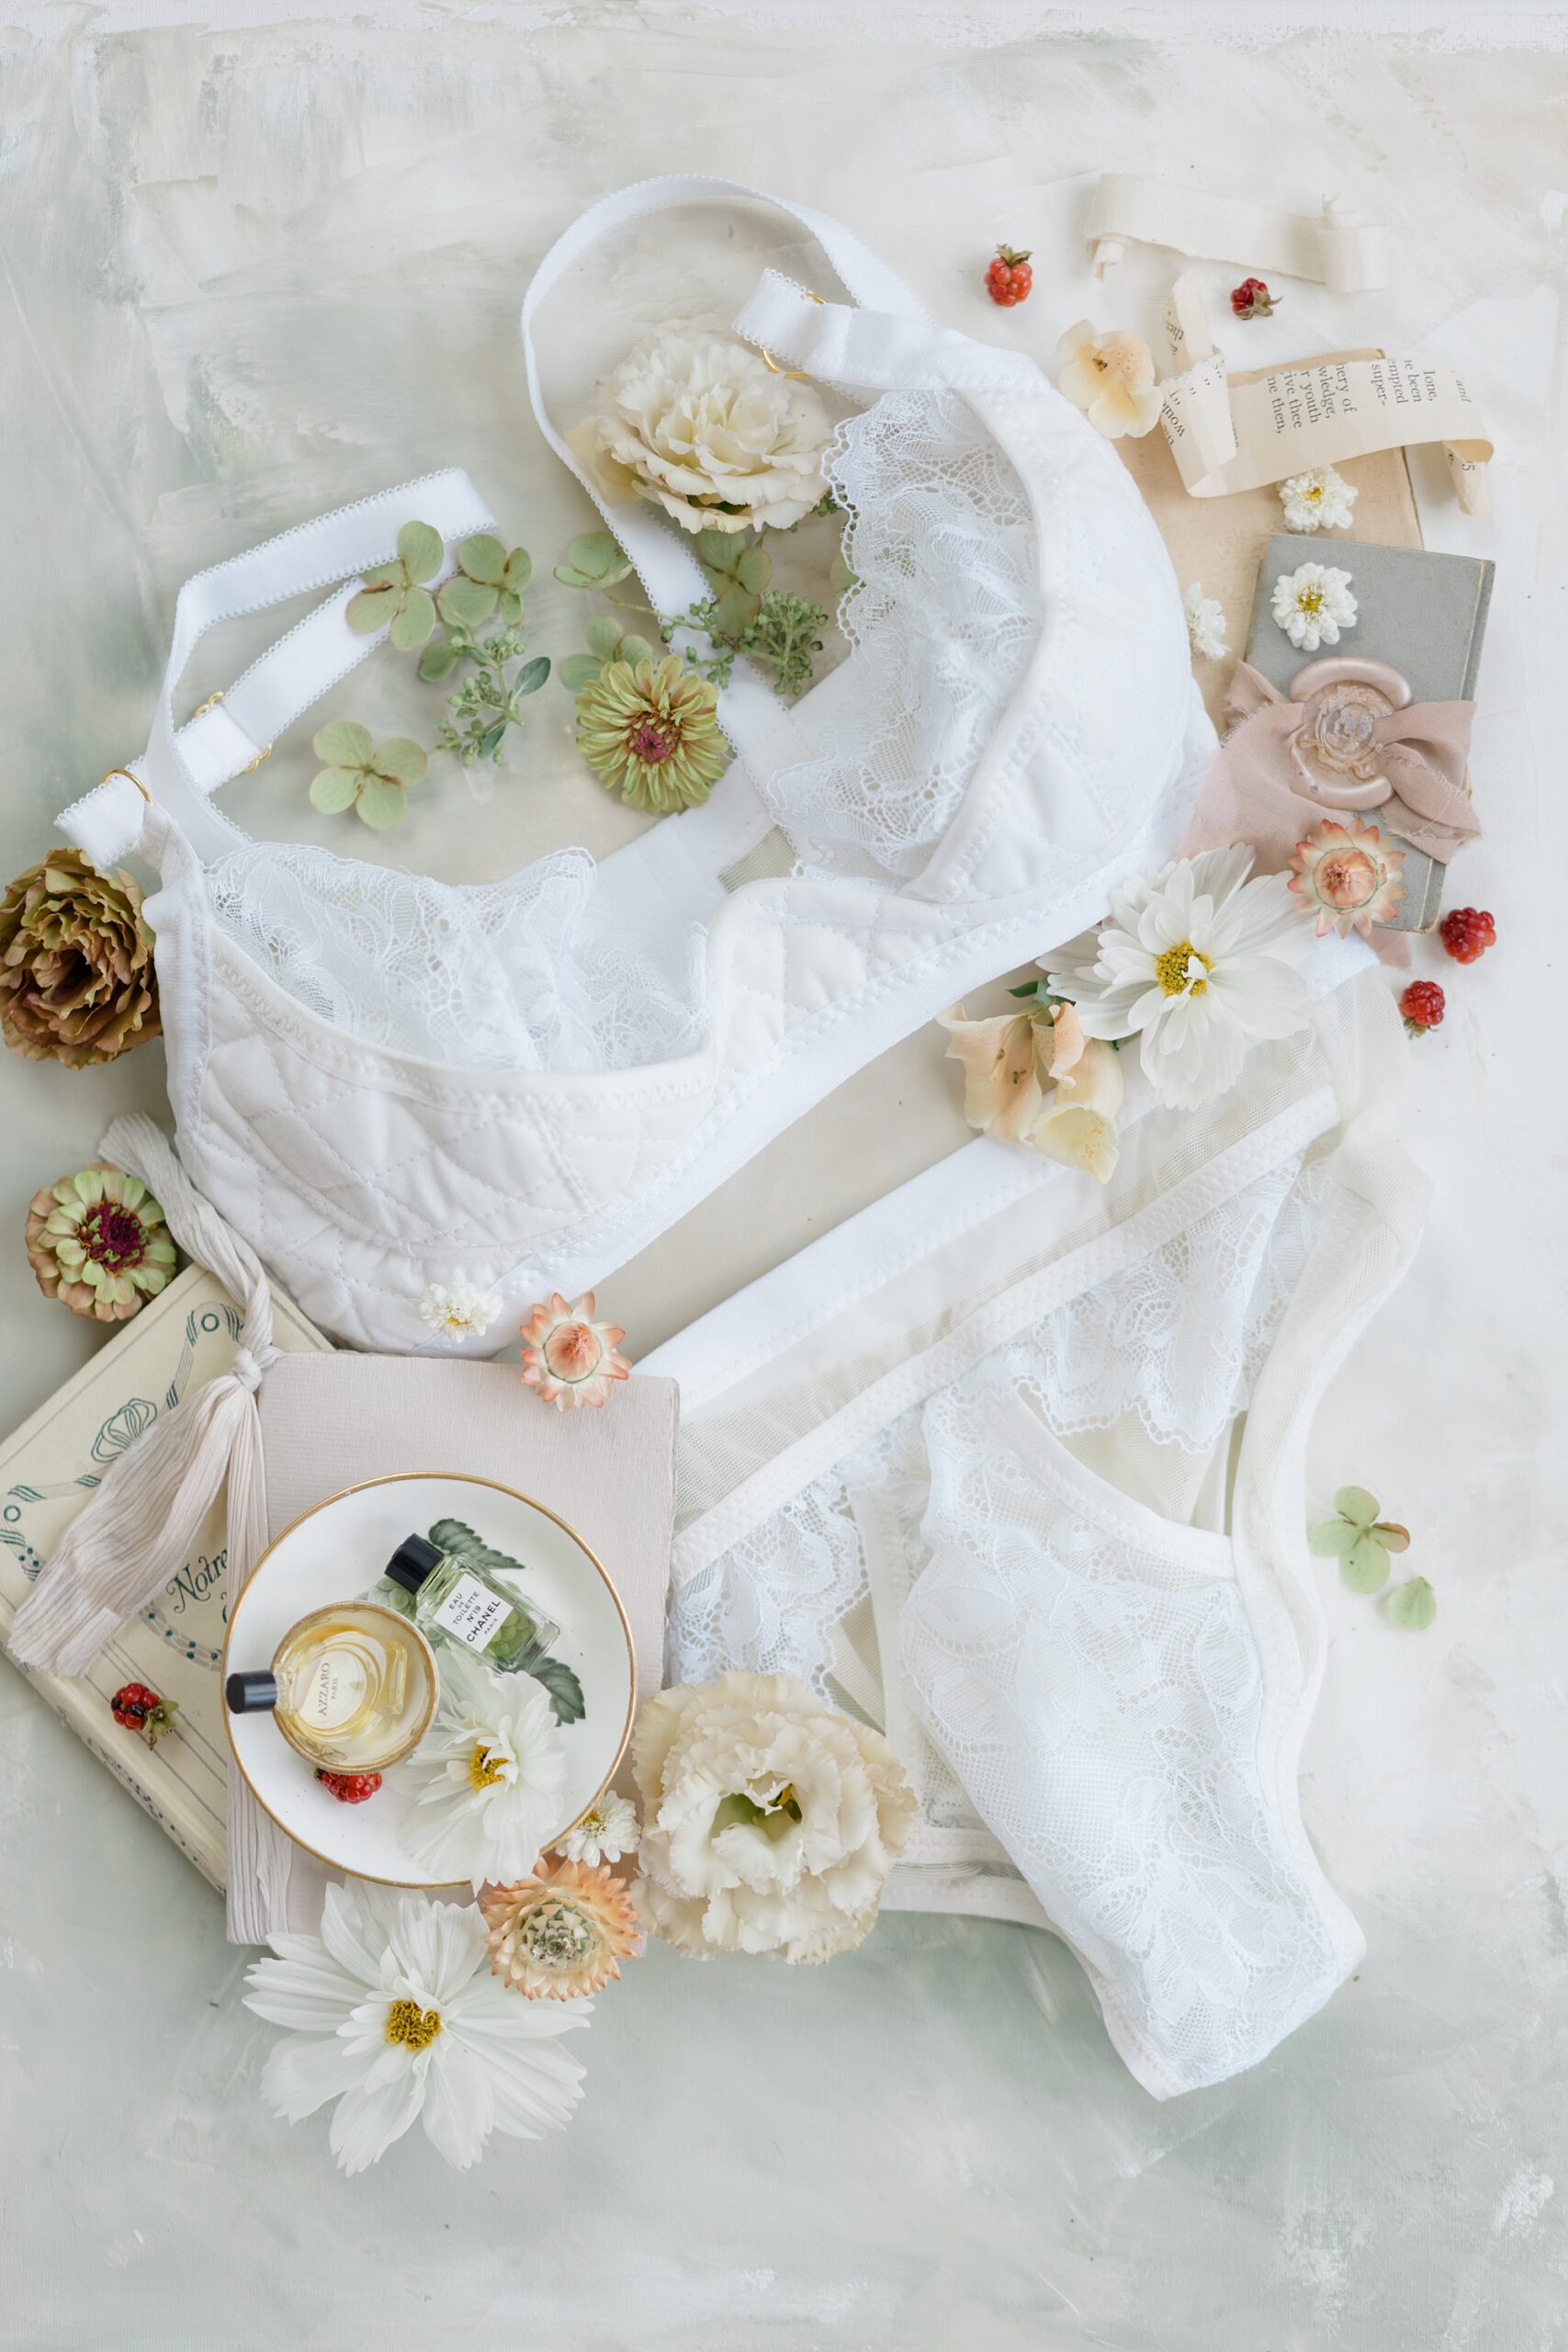 Capturing Flatlay Details | Elevating Your Wedding with Flatlays